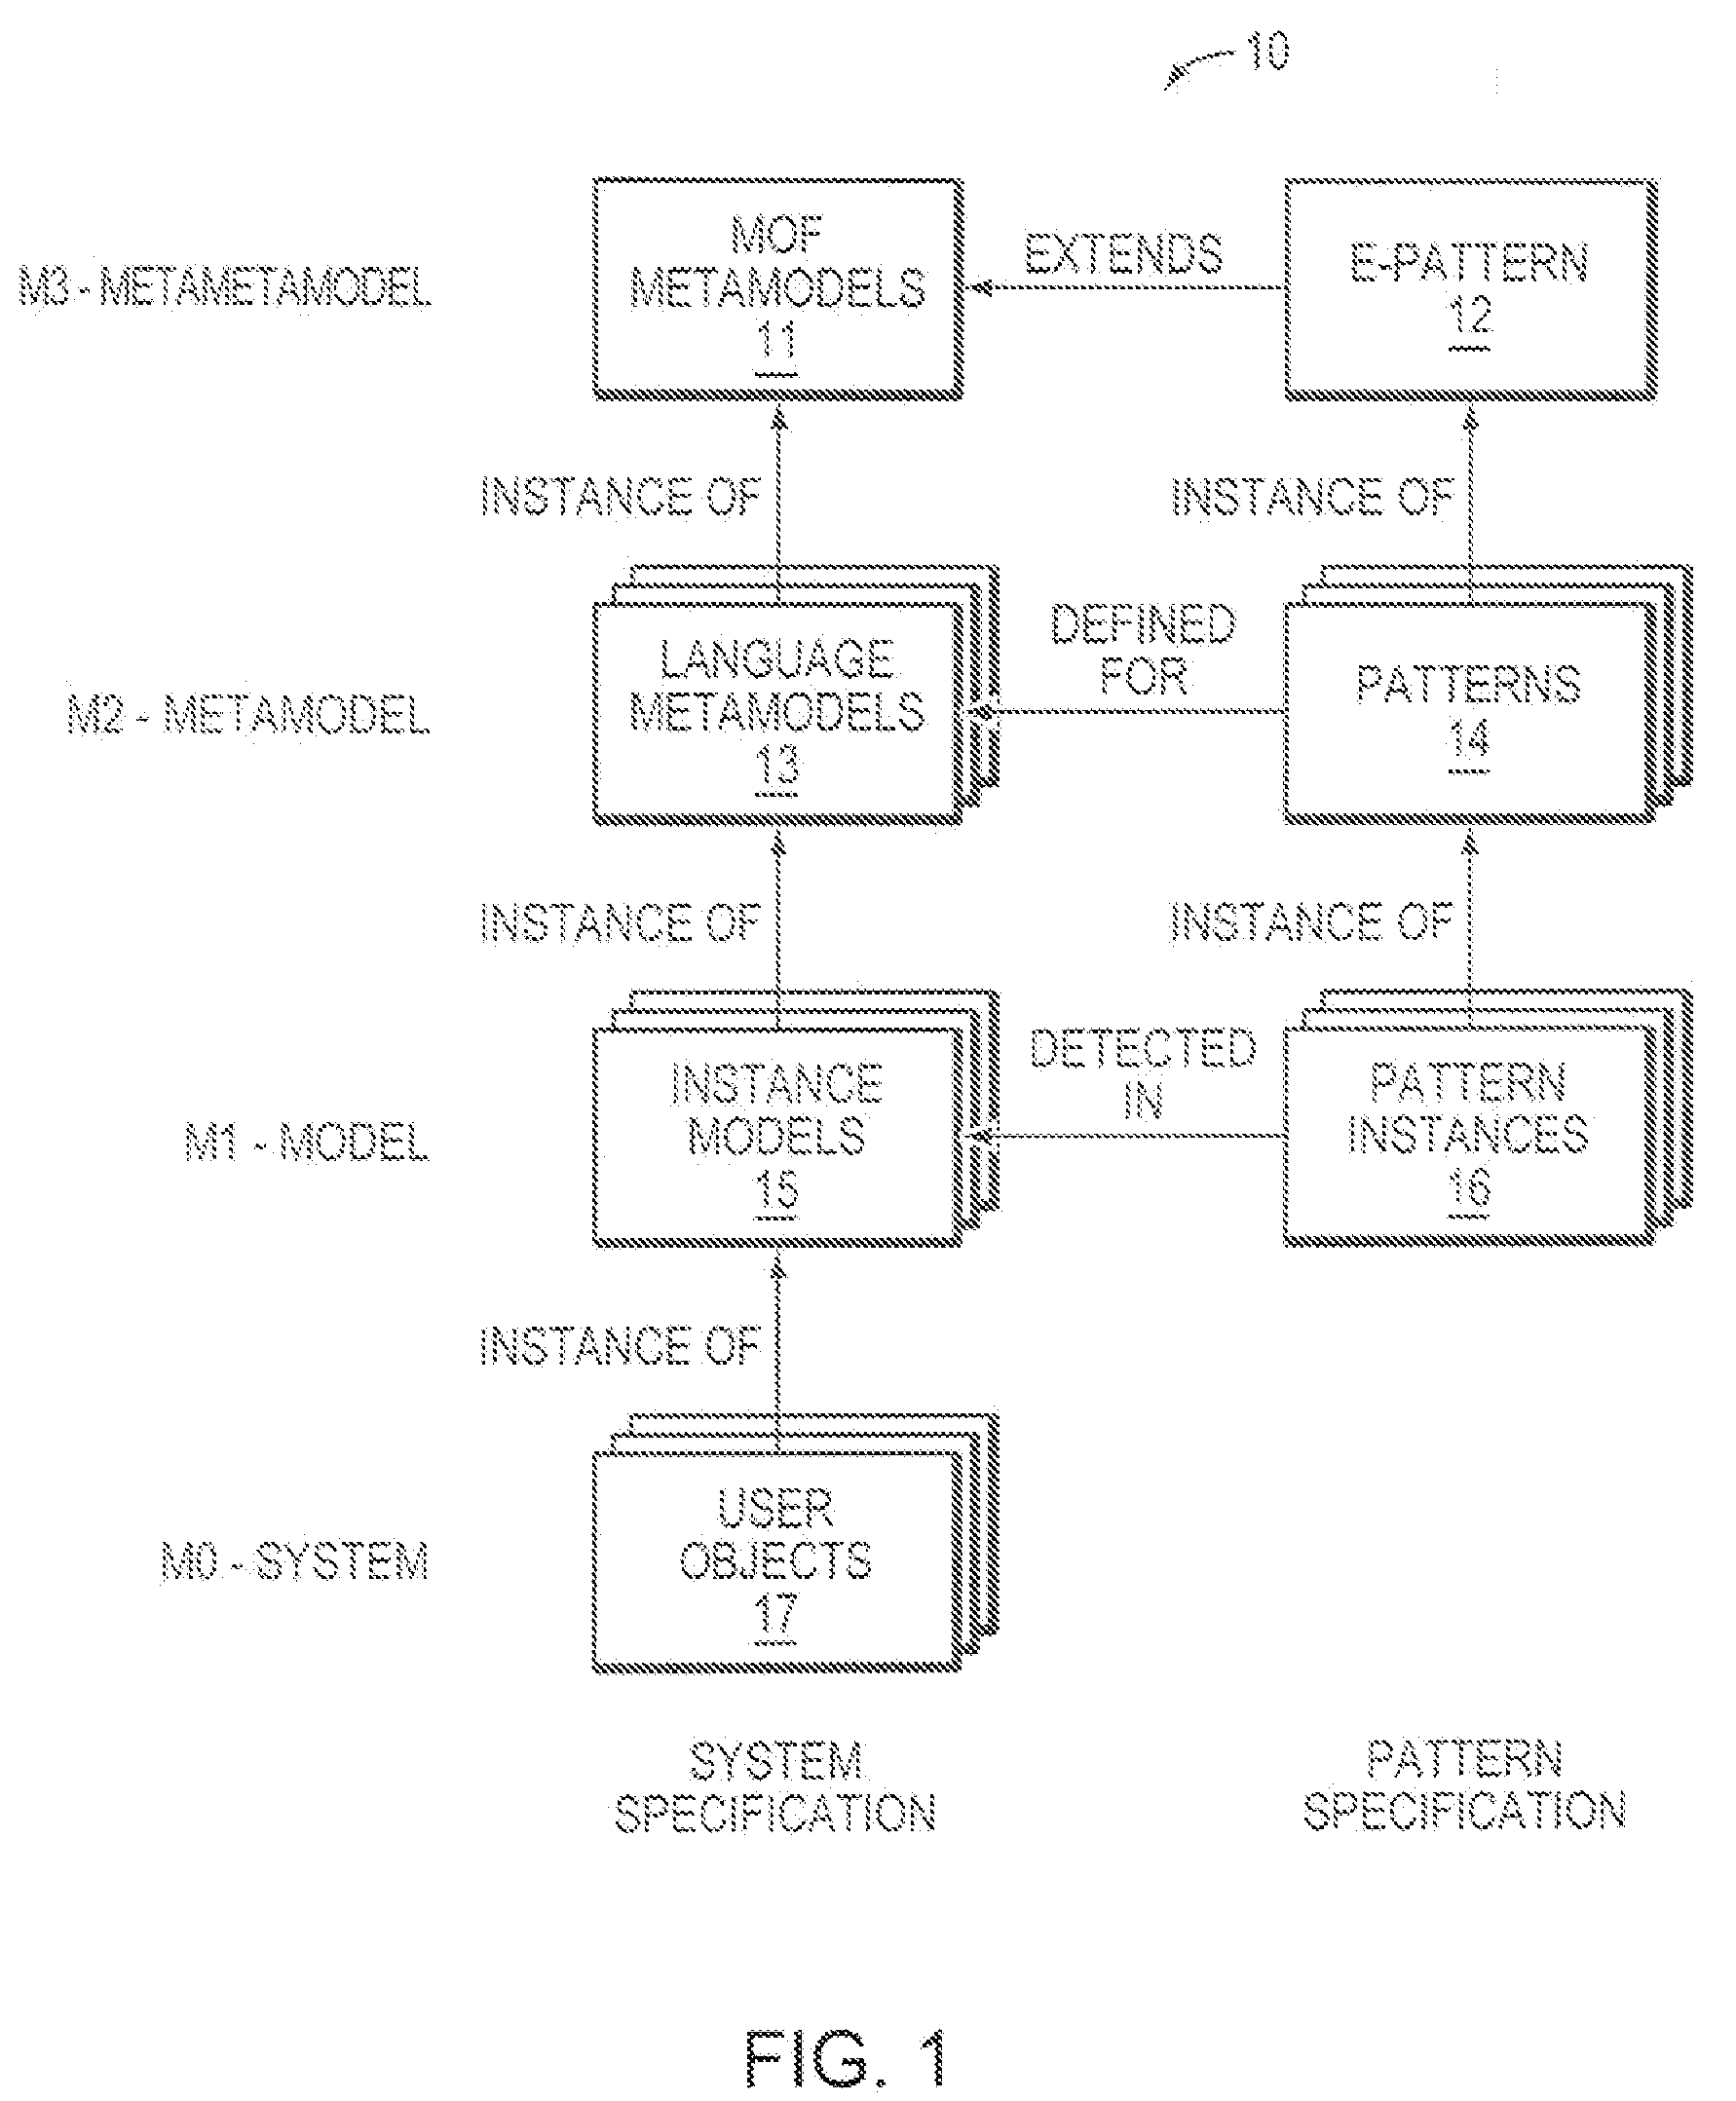 Computer method and system for pattern specification using meta-model of a target domain